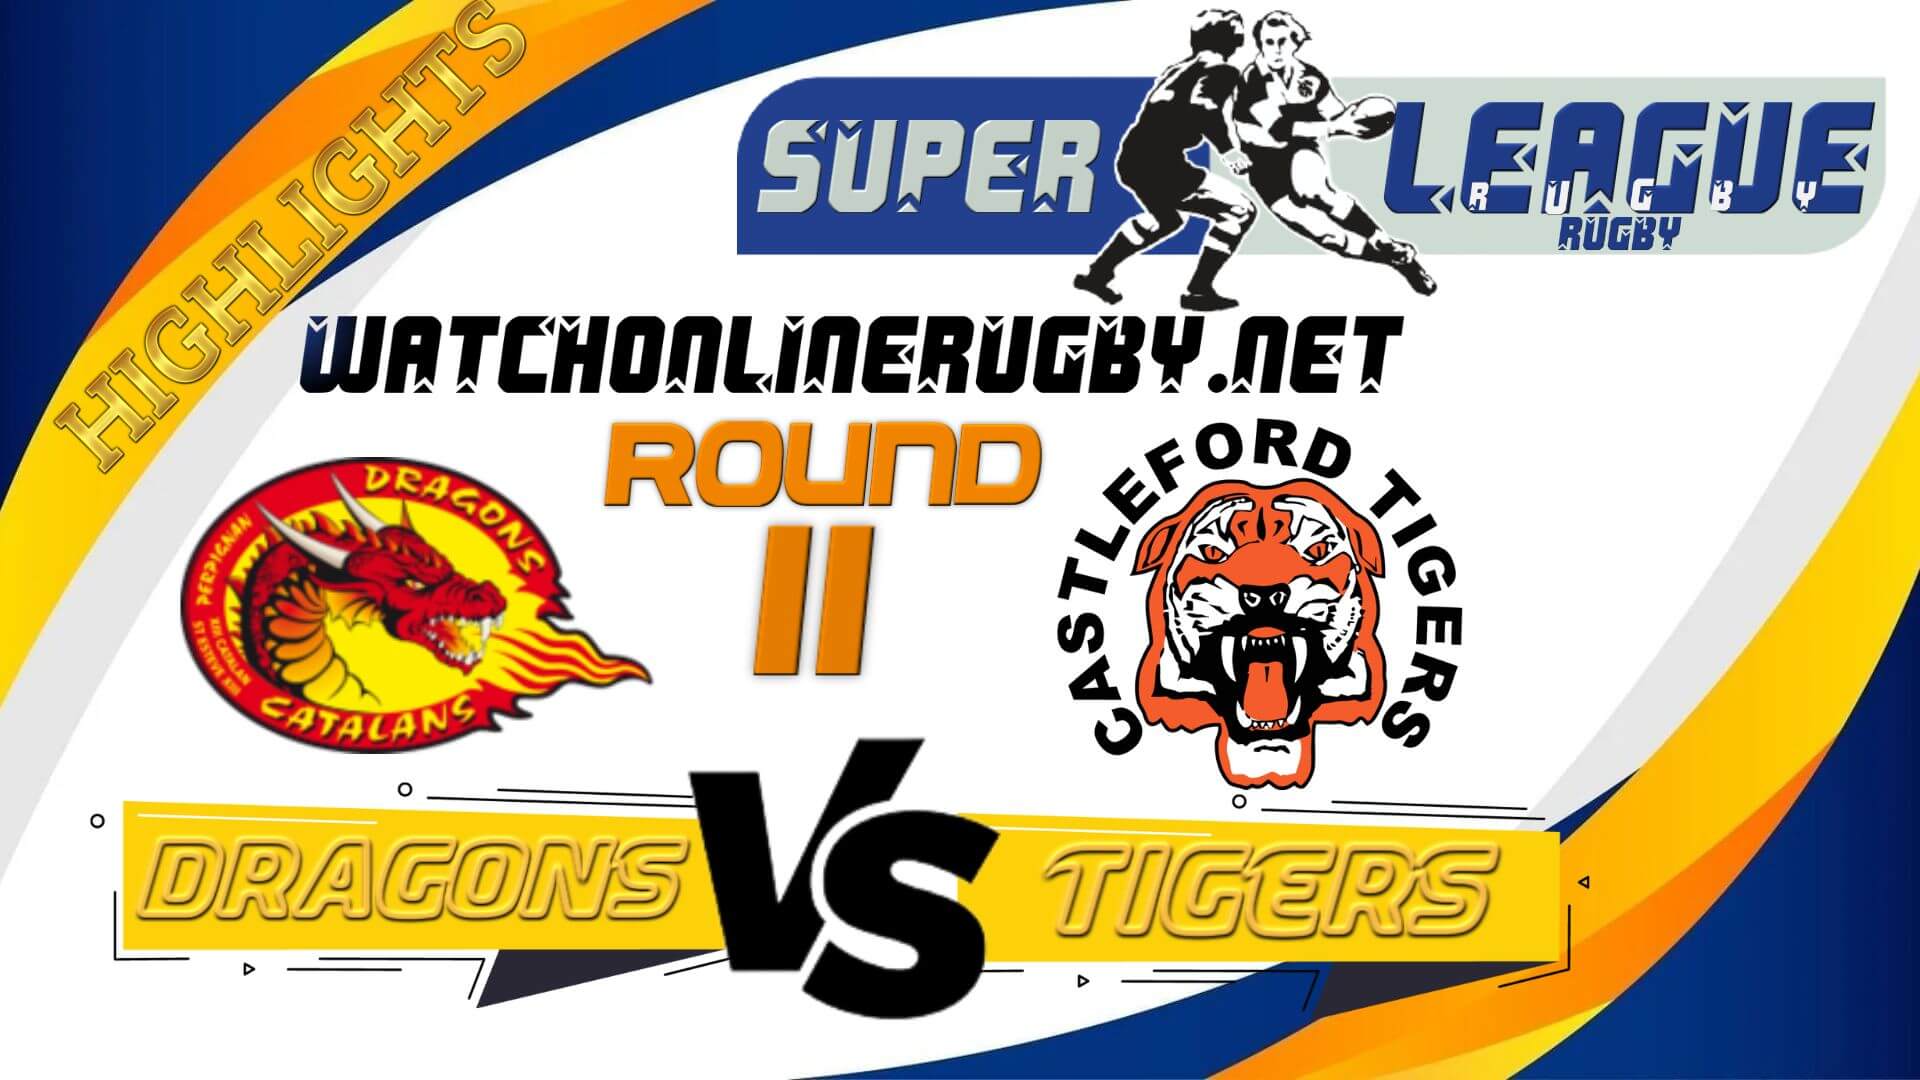 Catalans Dragons Vs Castleford Tigers Super League Rugby 2022 RD 11